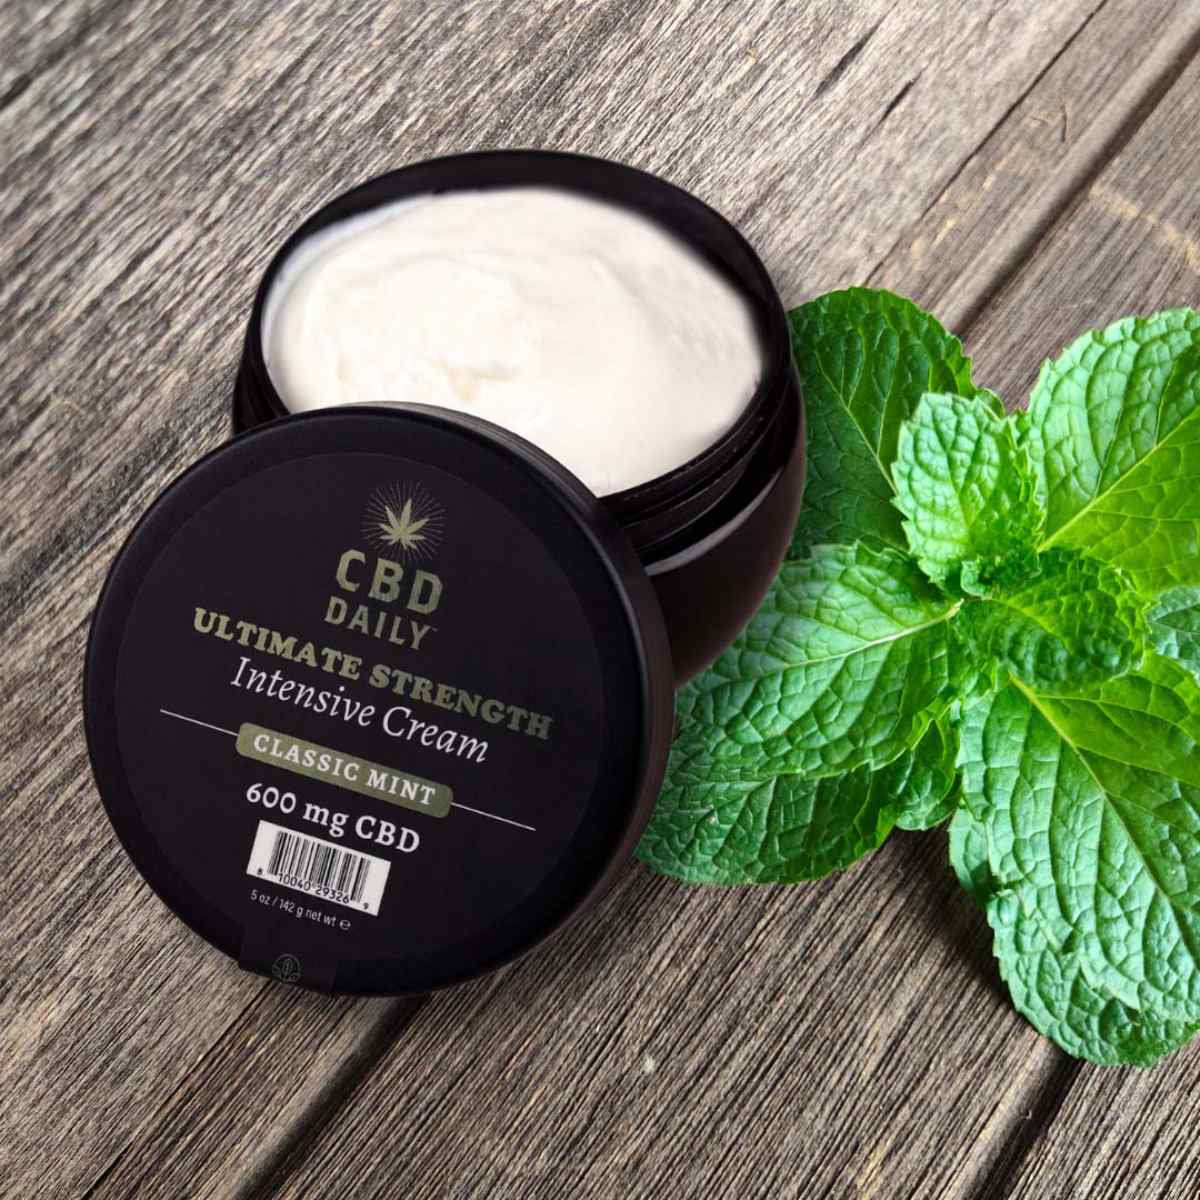 Product Image of CBD Daily Intensive Cream Ultimate Strength